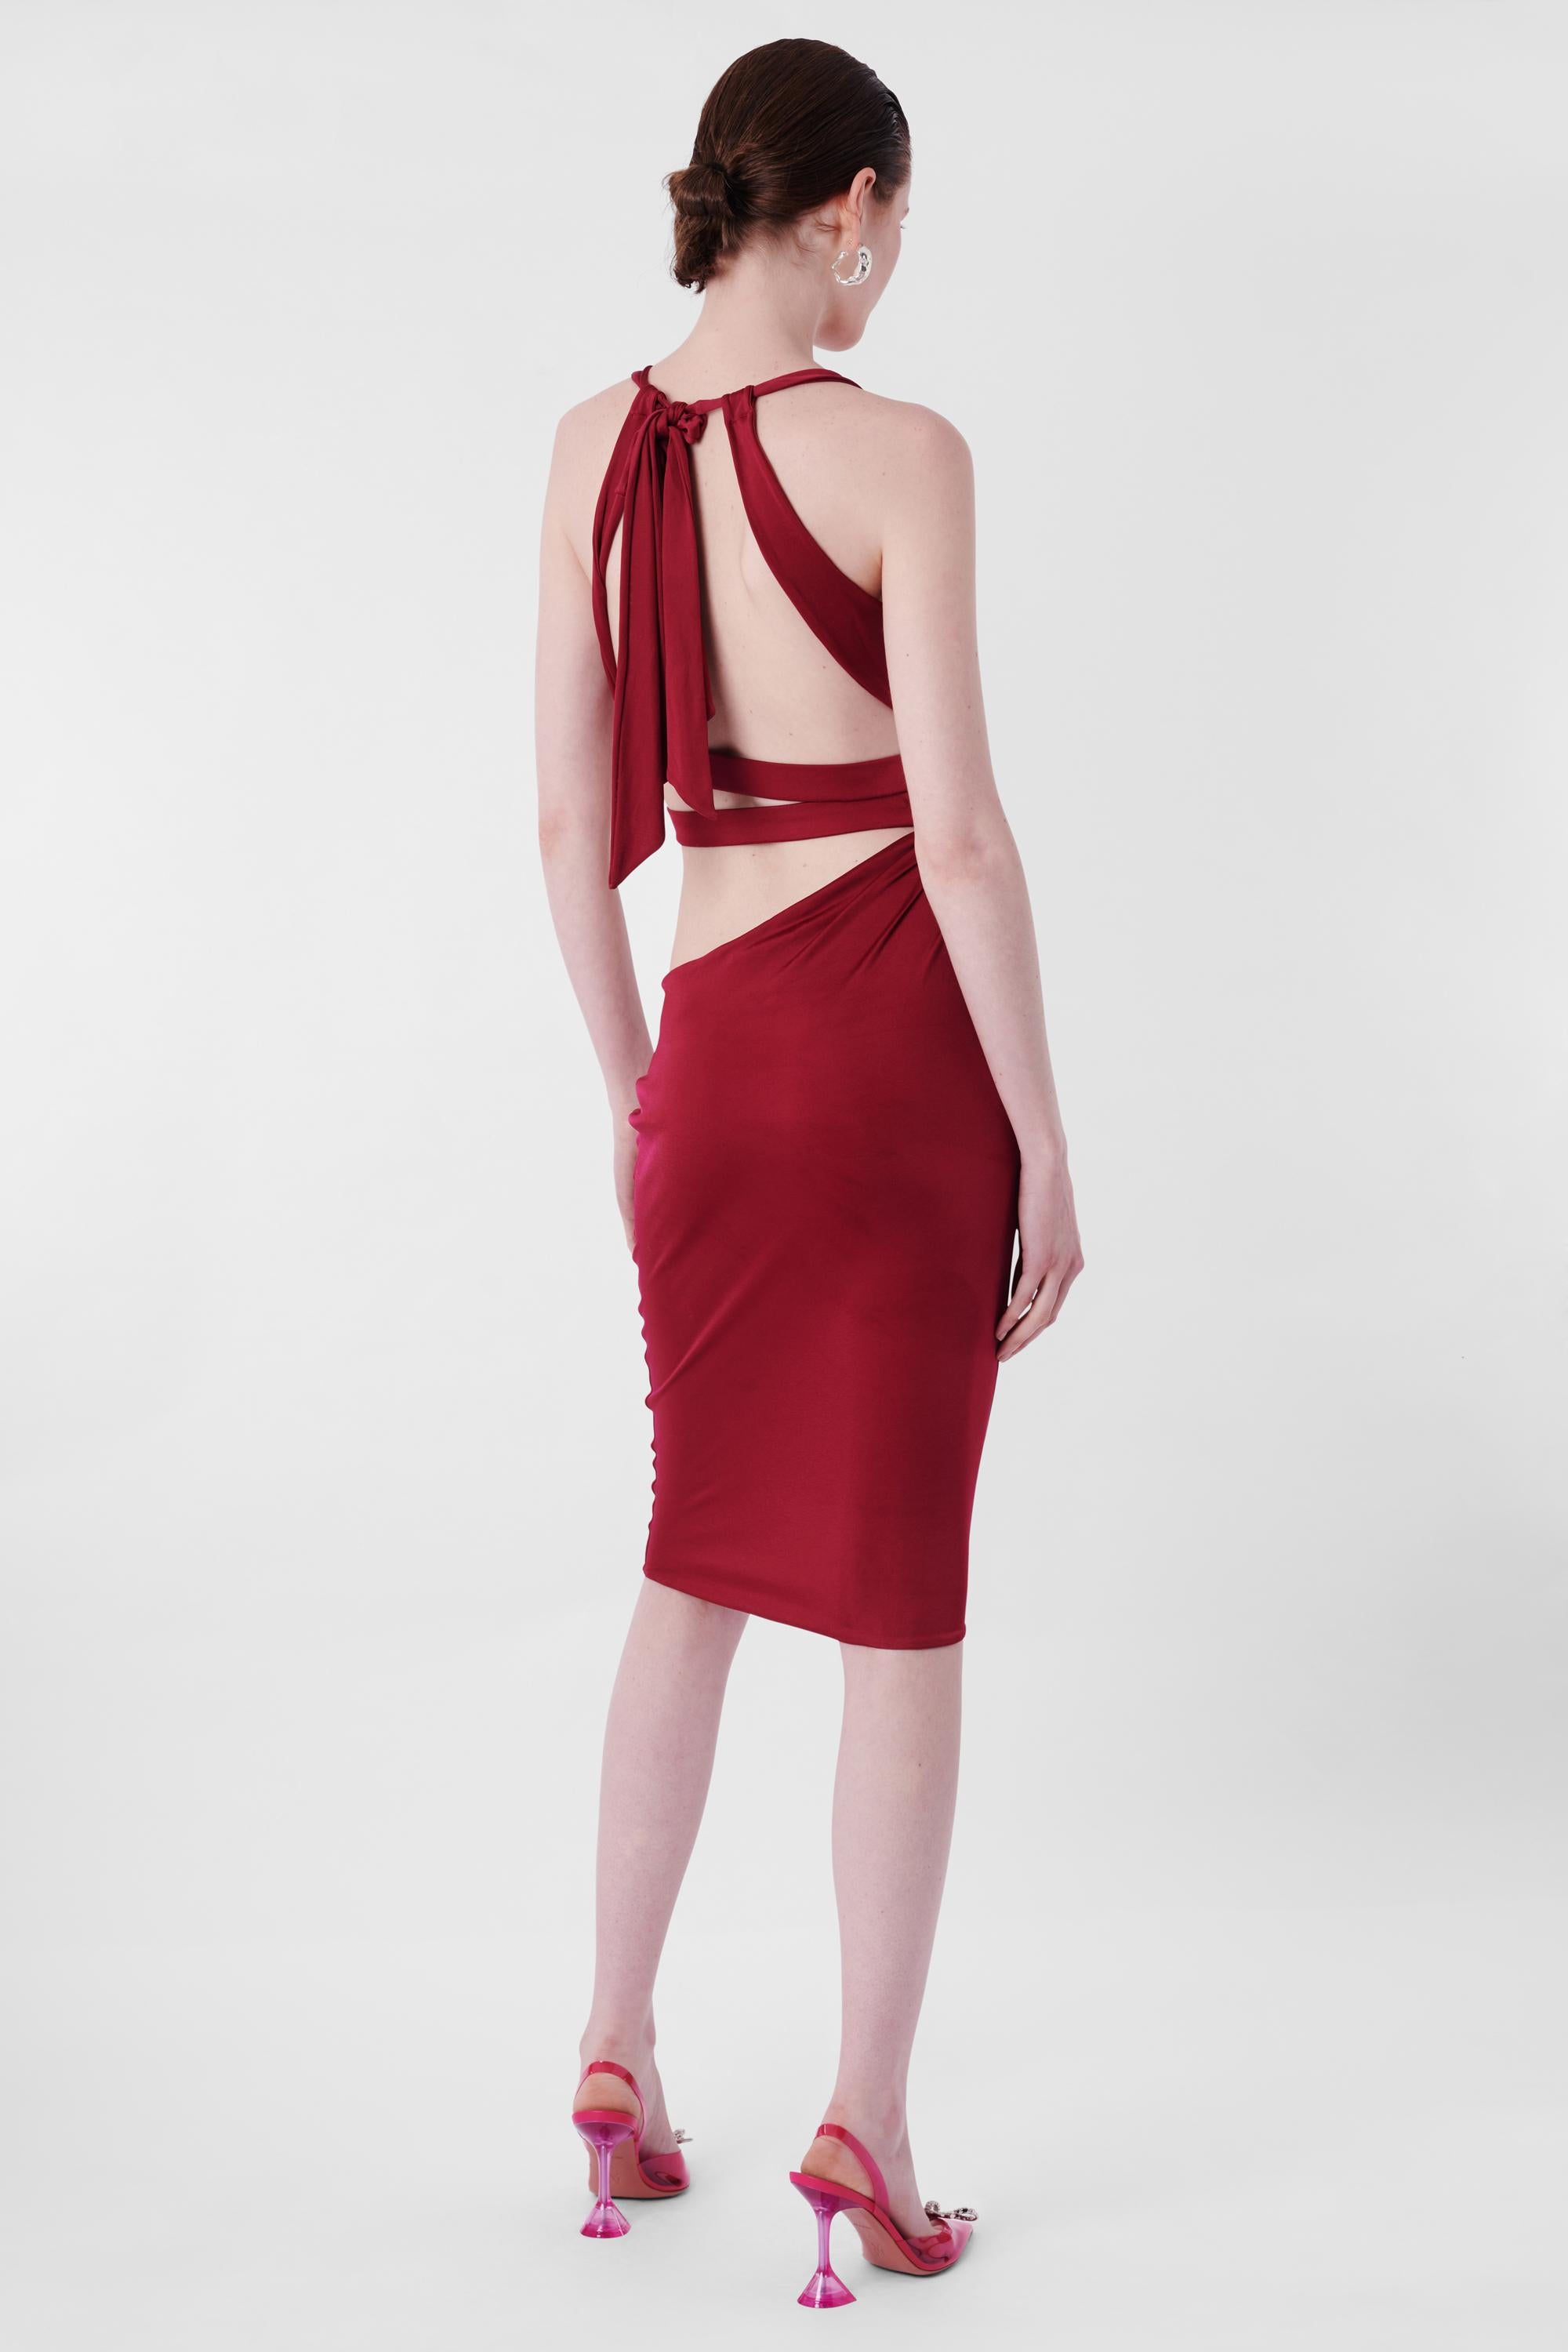 Gucci by Tom Ford F/W 2004 Maroon Cutout Bodycon Dress. Features cutout design, halter neck with adjustable strap and midi length.

Label size: Small
Modern size: UK: 6 to 8, US: 0 to 2, EU: 34 to 36
Measurements when laid flat: length: 47 inches,